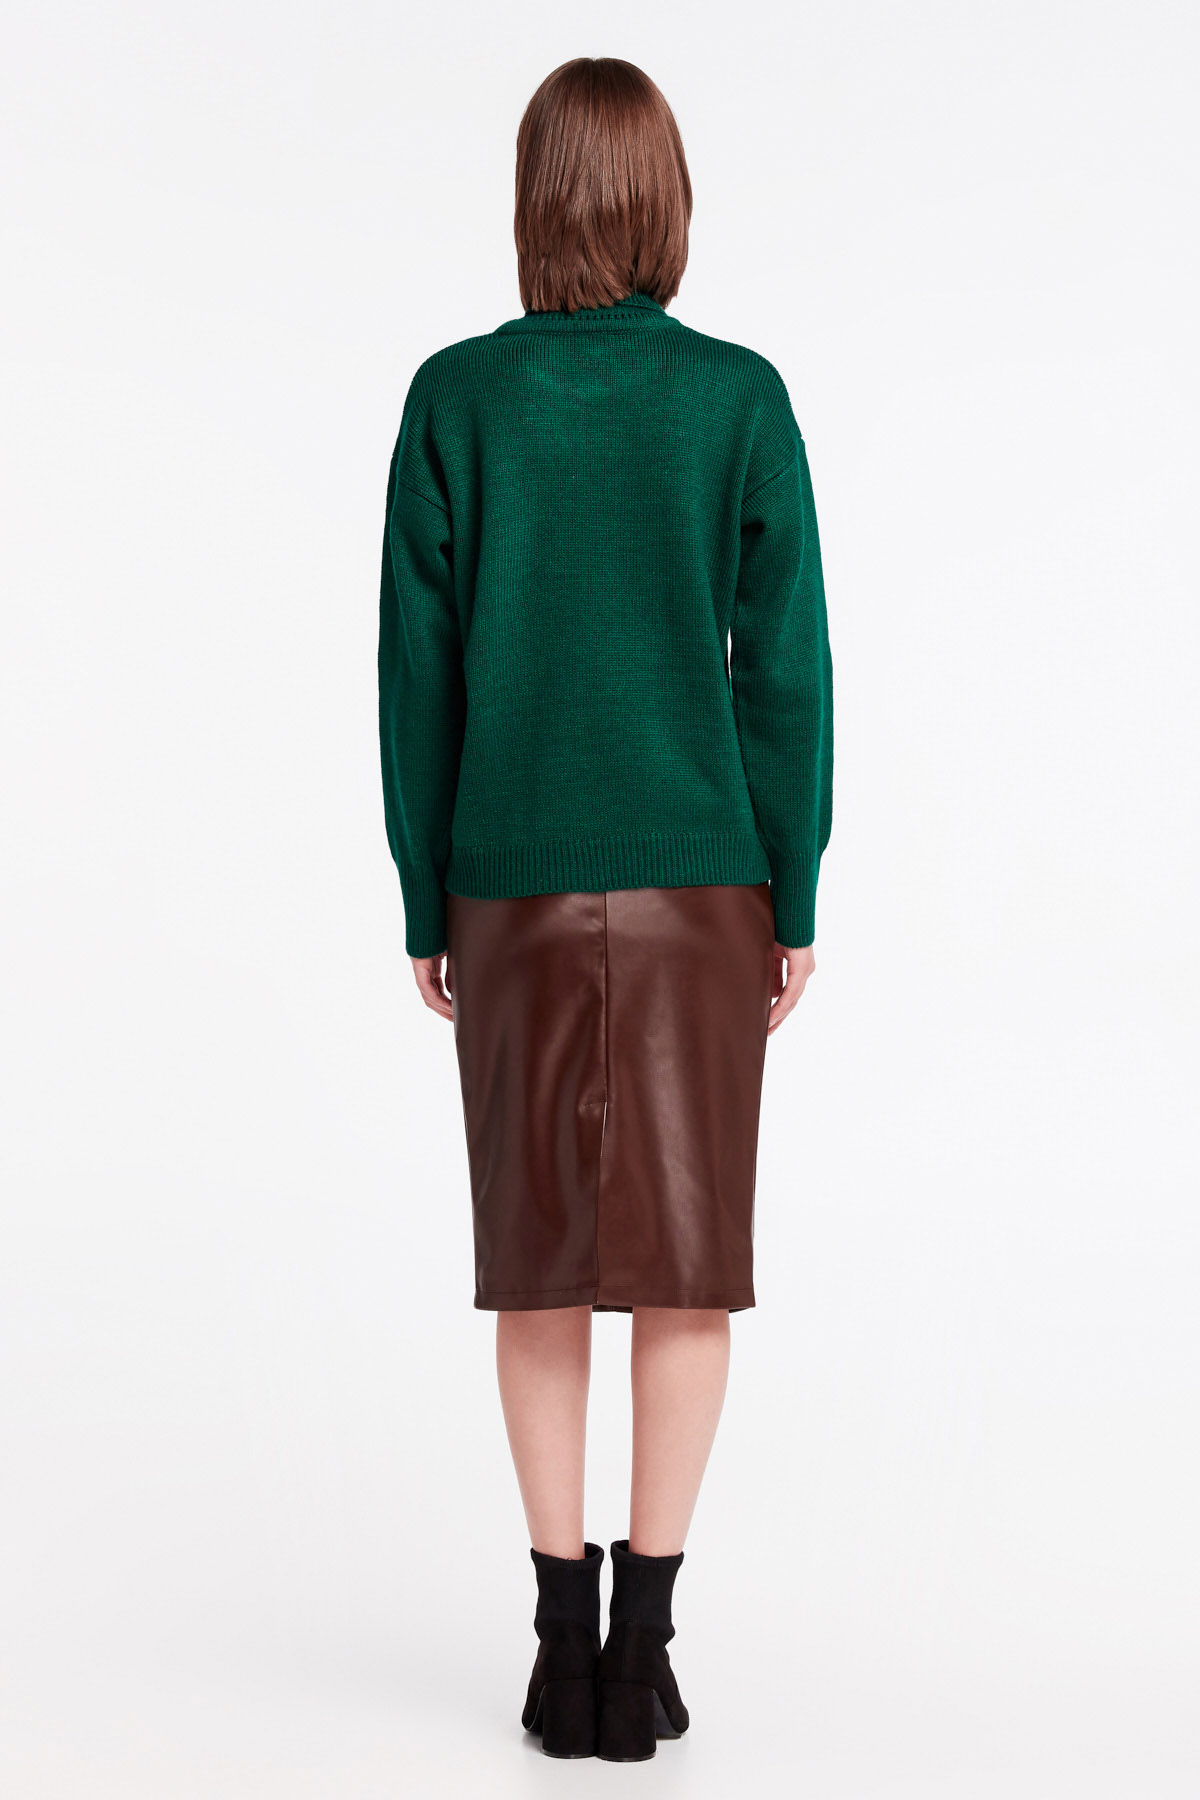 Green knit polo neck sweater, photo 5